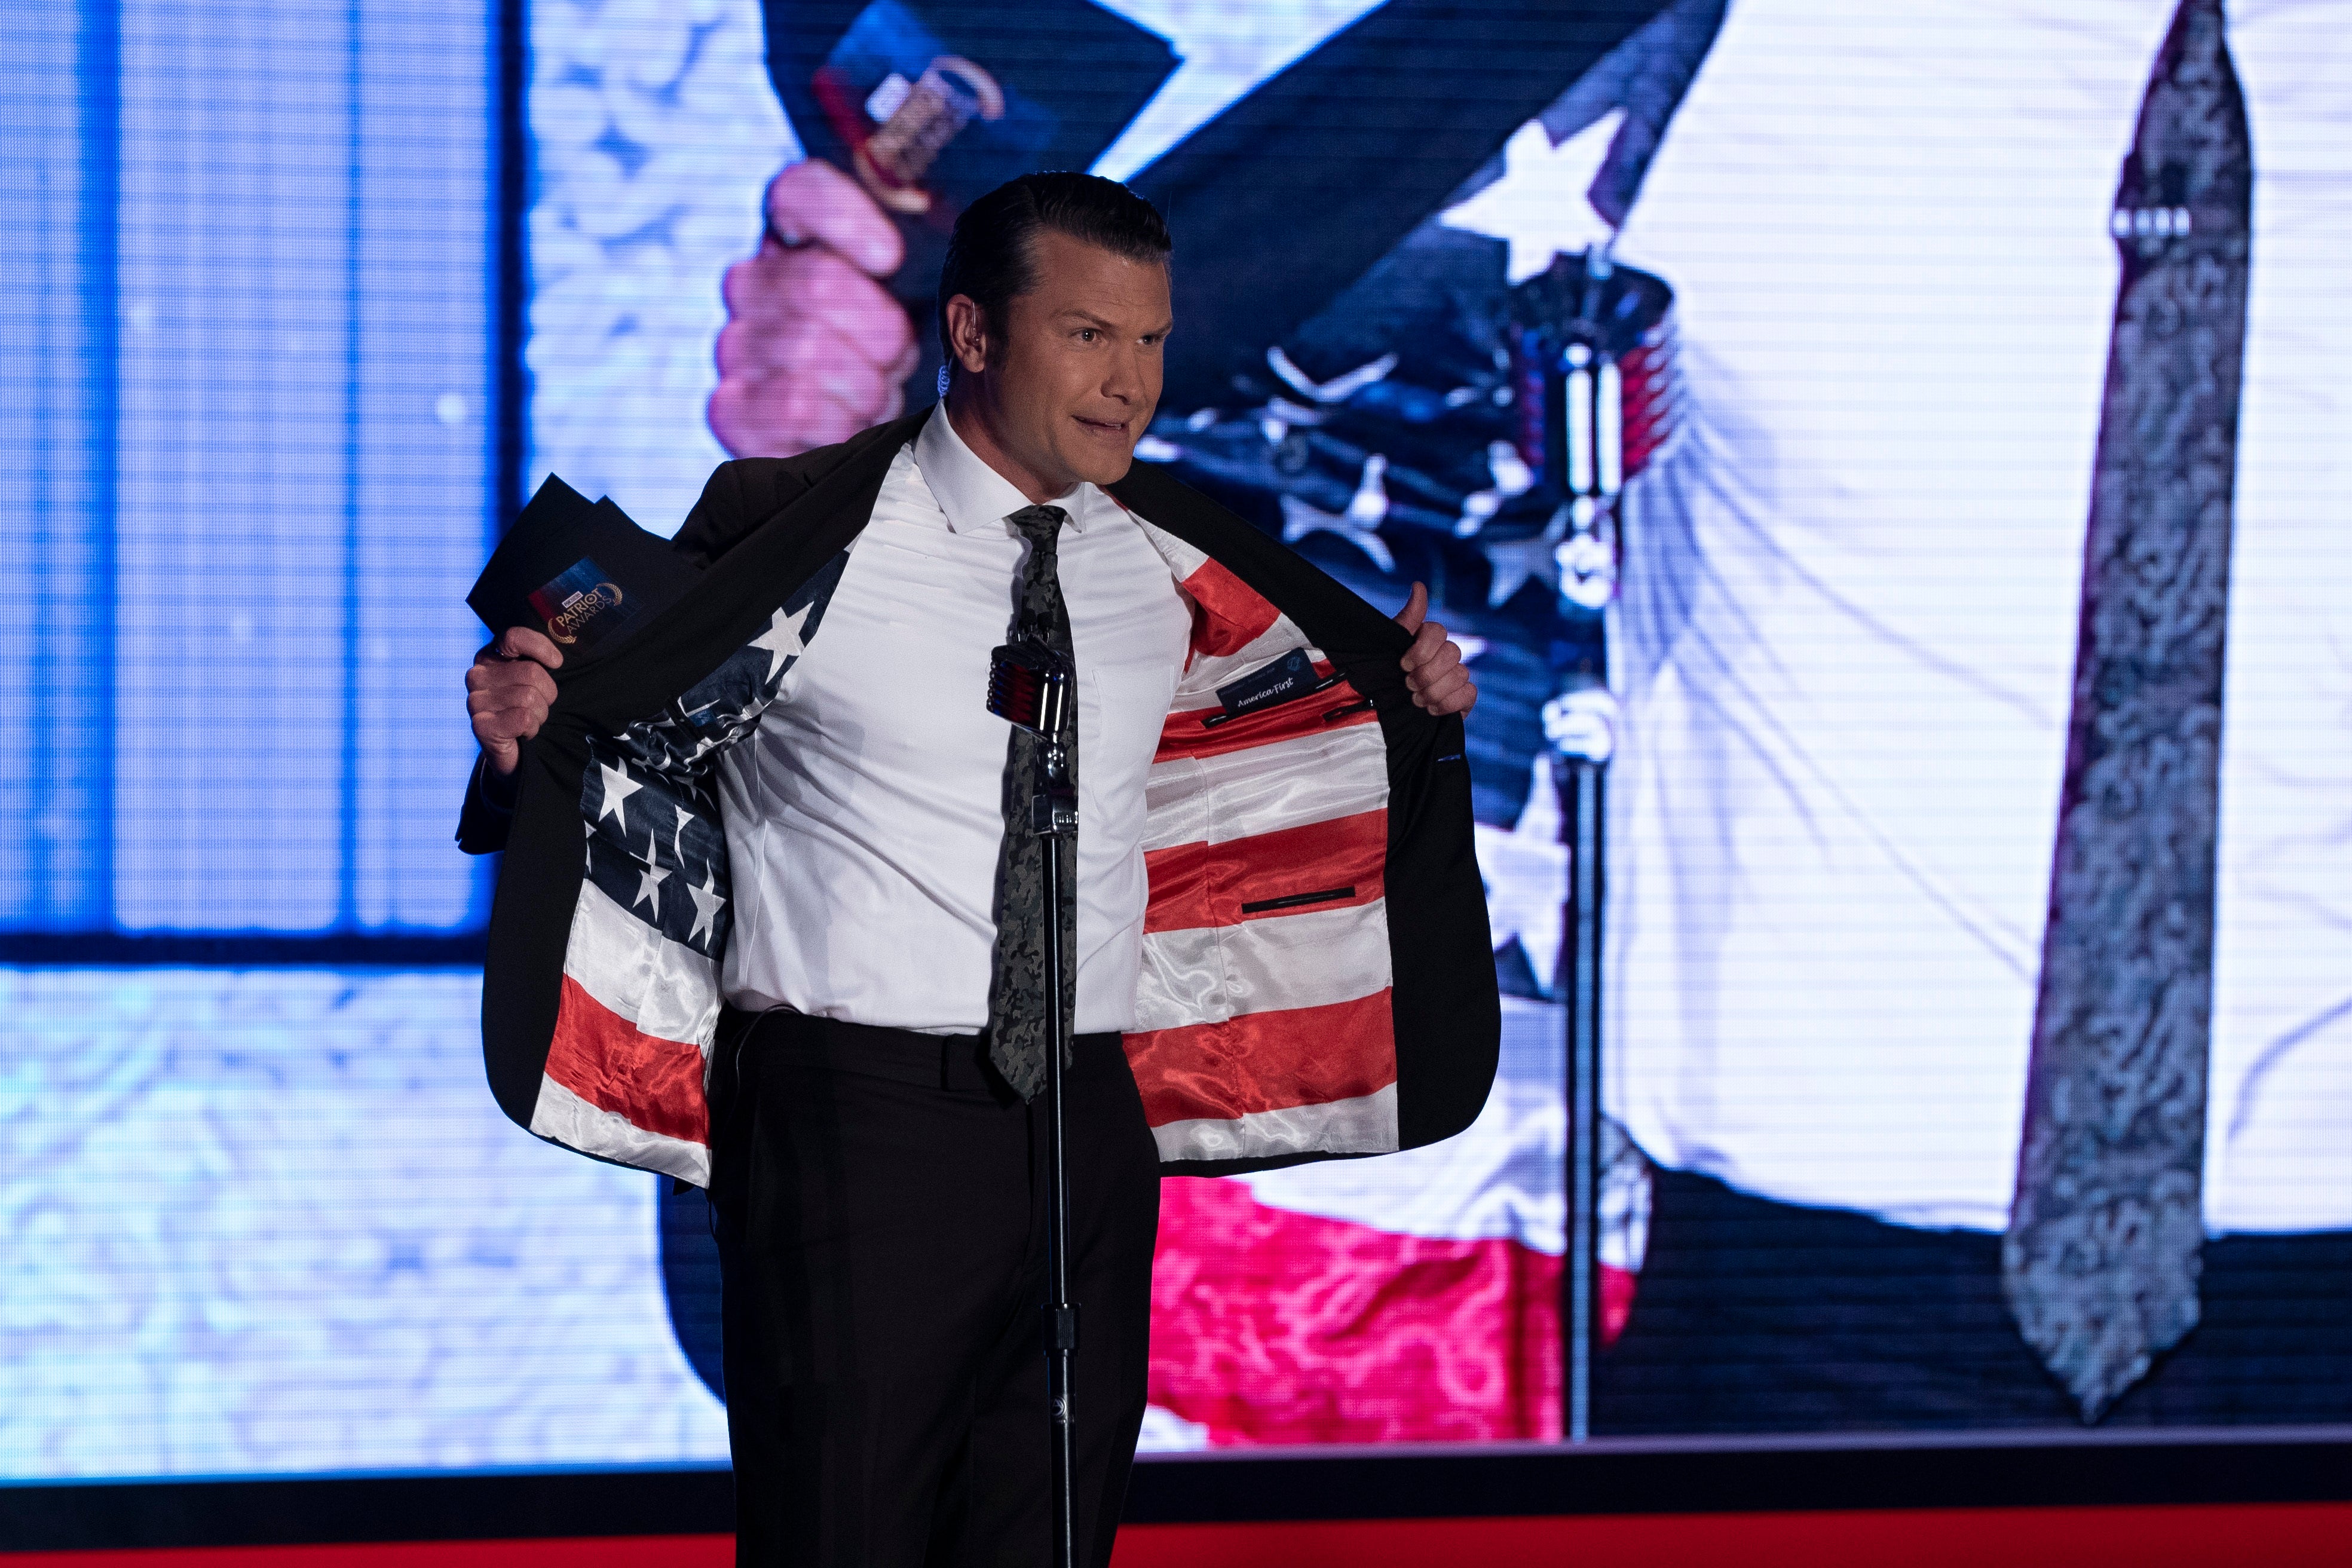 PeteÂ Hegseth: Fox Nationâ€™s Patriot Awards will remind viewers 'why America is such an exceptional place'